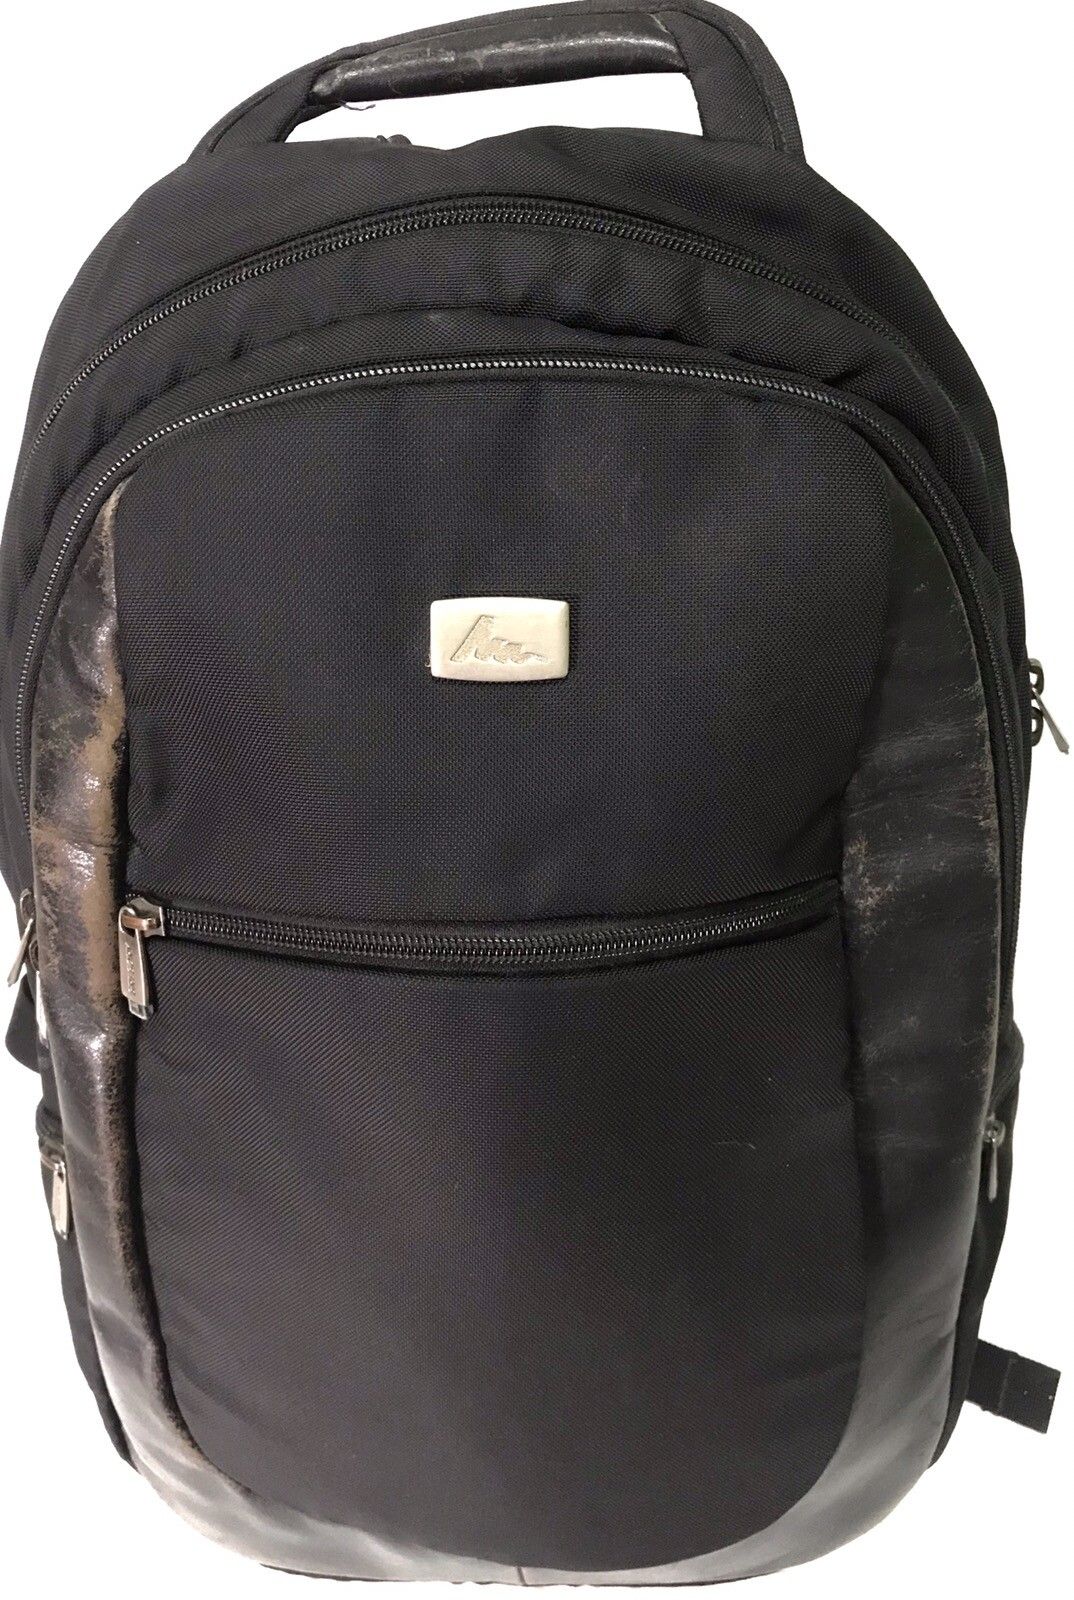 Authentic Gregory Laptop Size Backpack - 1